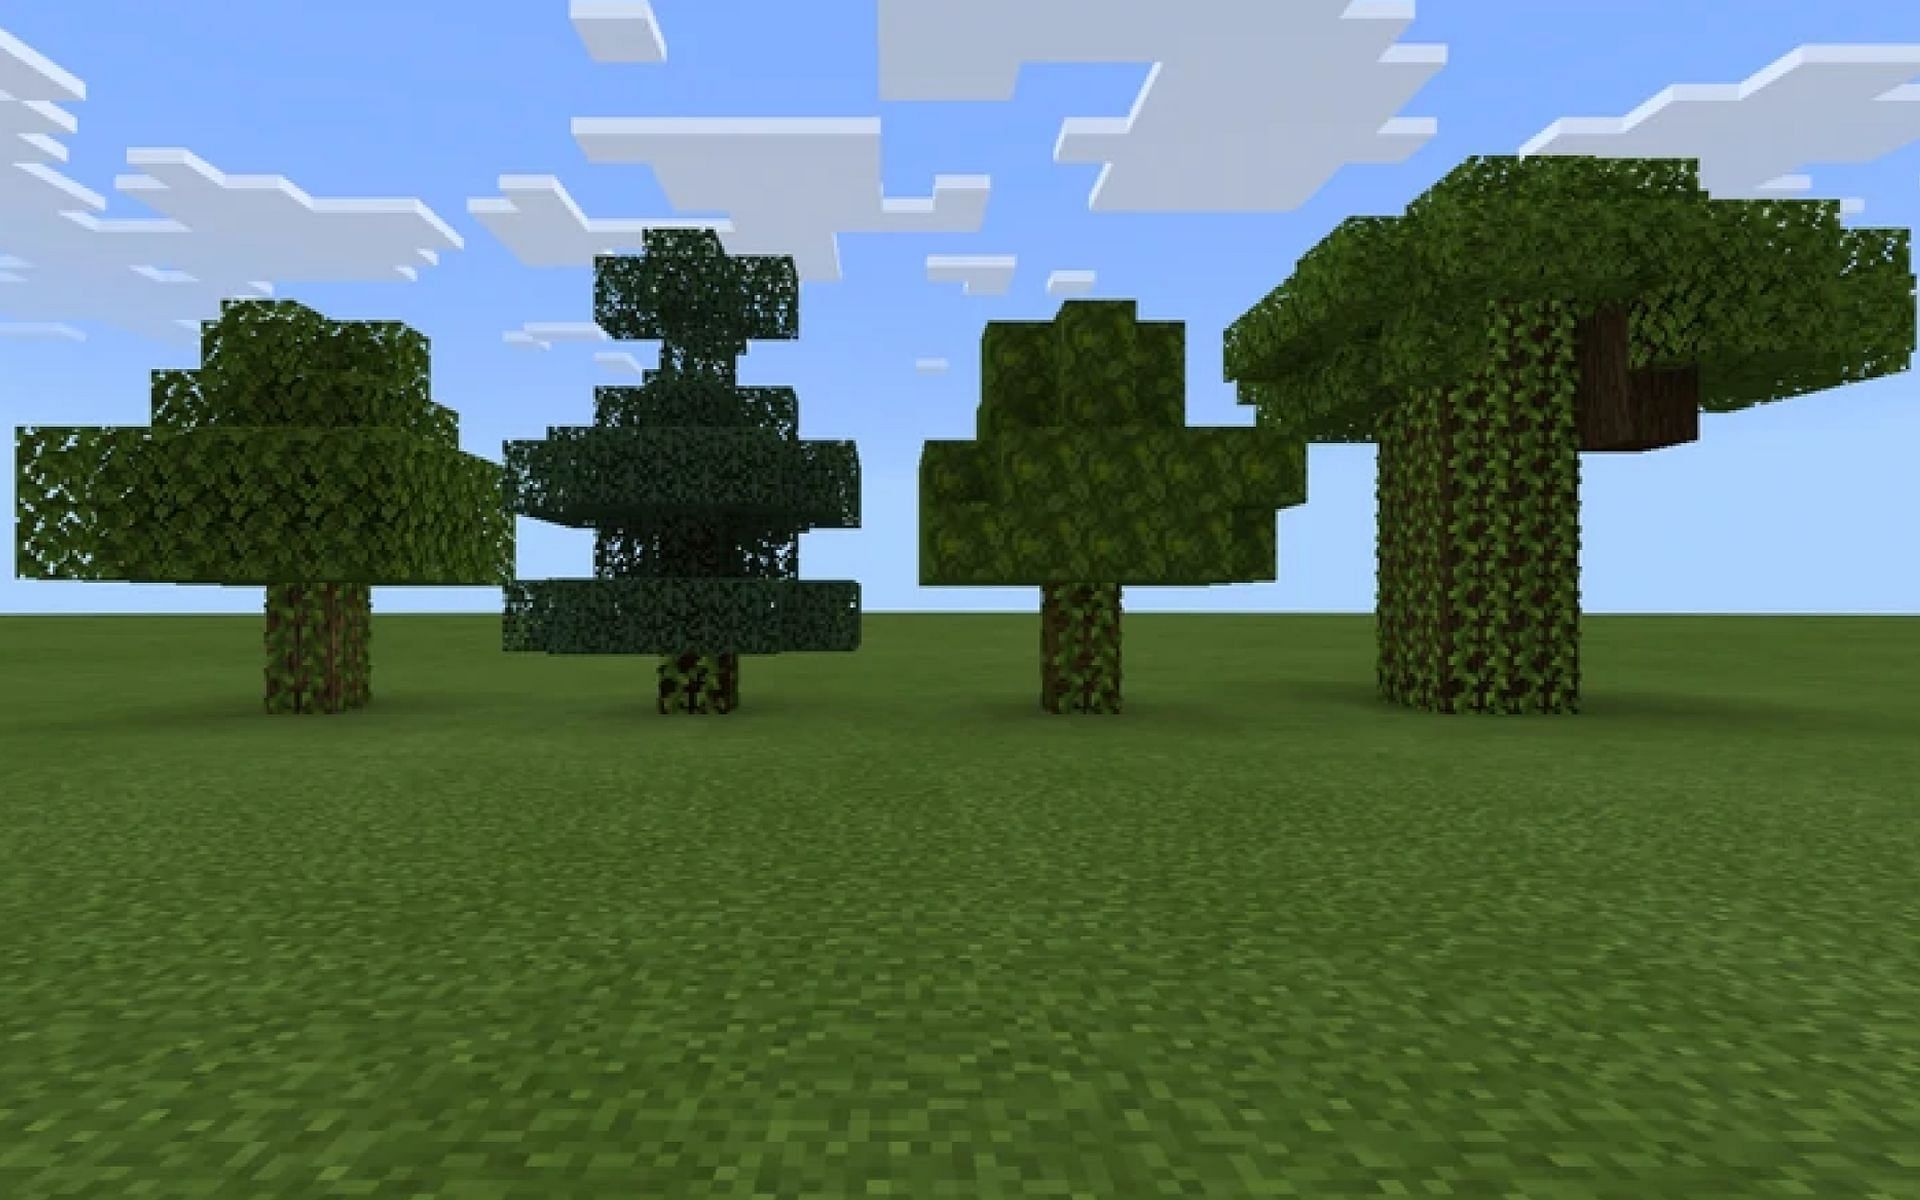 An image of dying trees in-game. Image via Minecraft.